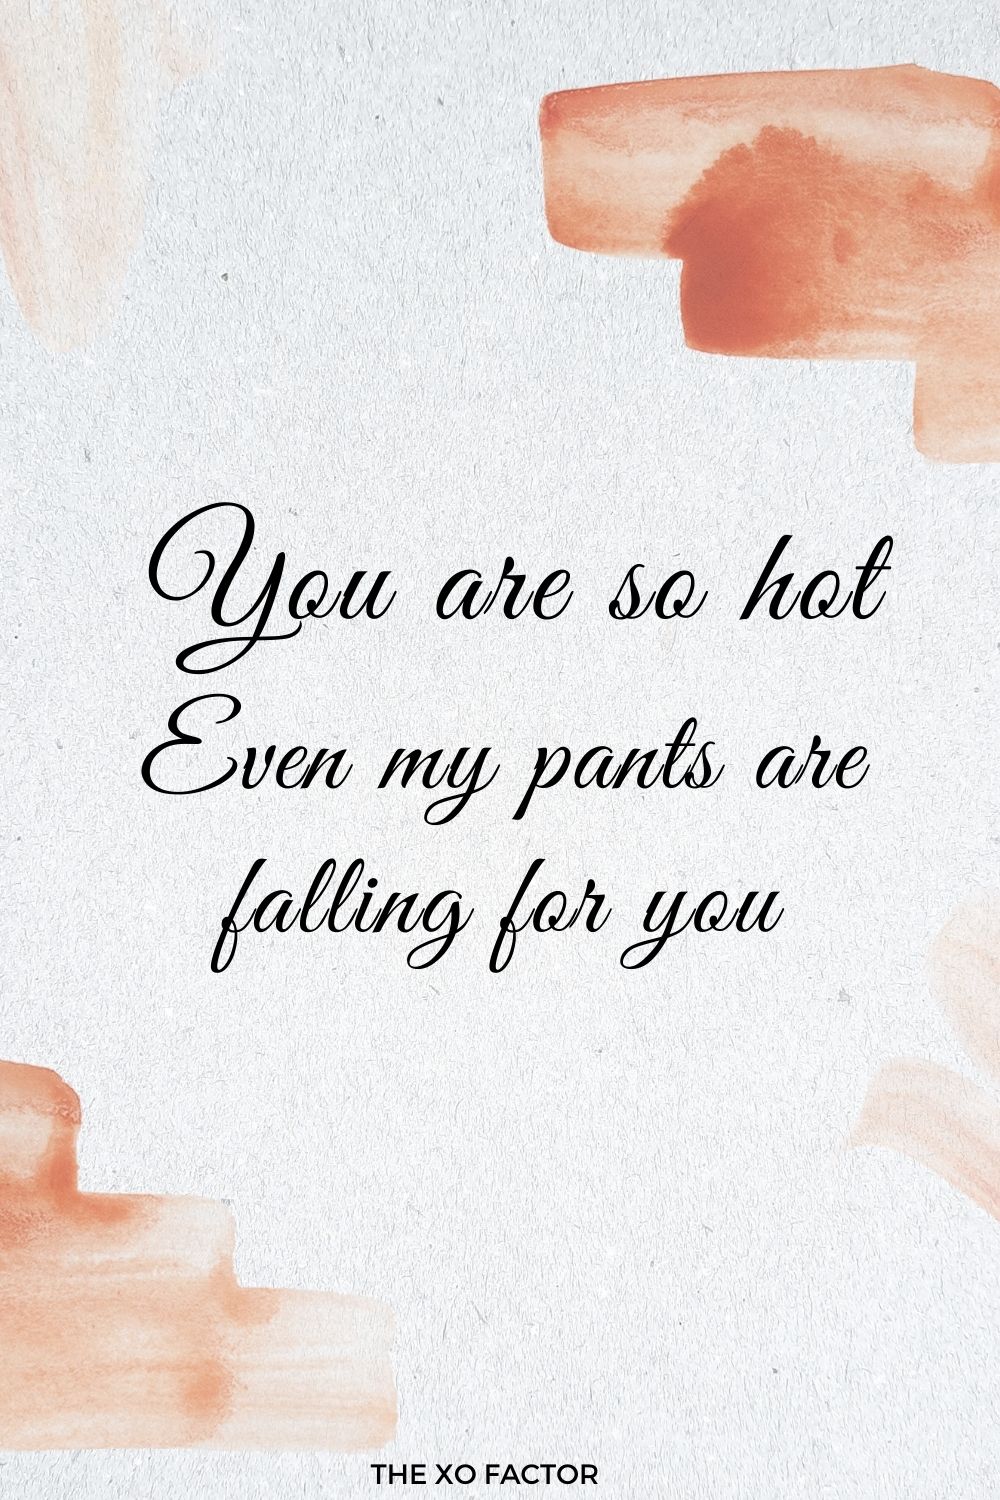 You are so hot, even my pants are falling for you